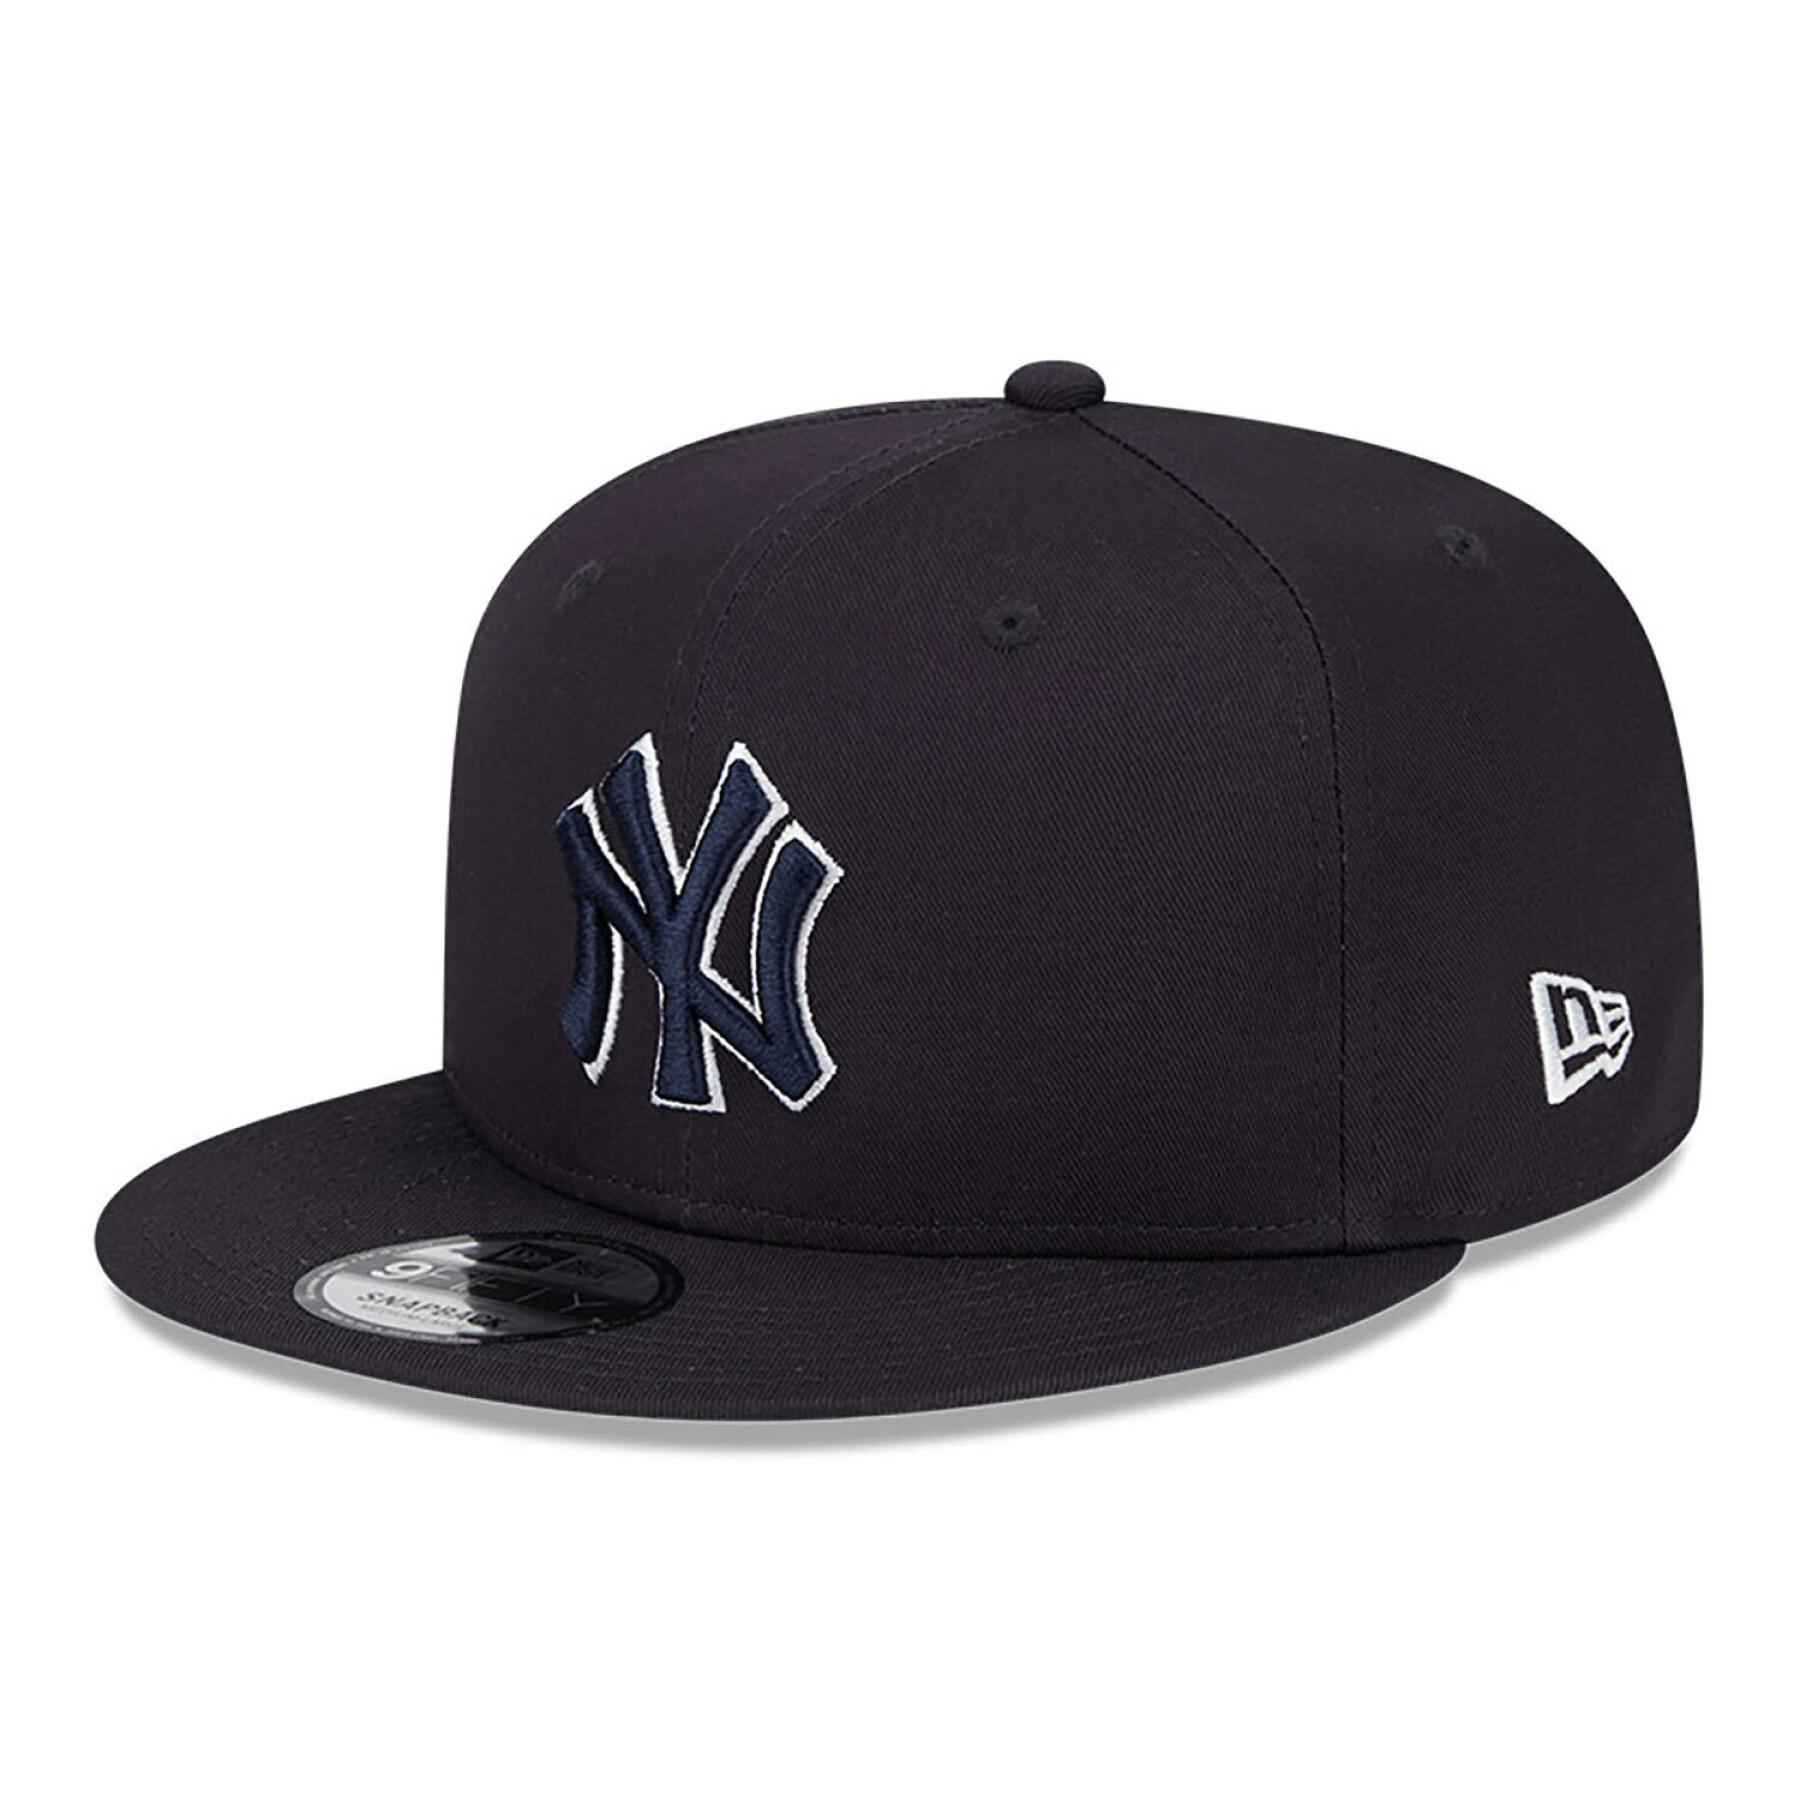 Gorra snapback con parche lateral New York Yankees 9Fifty